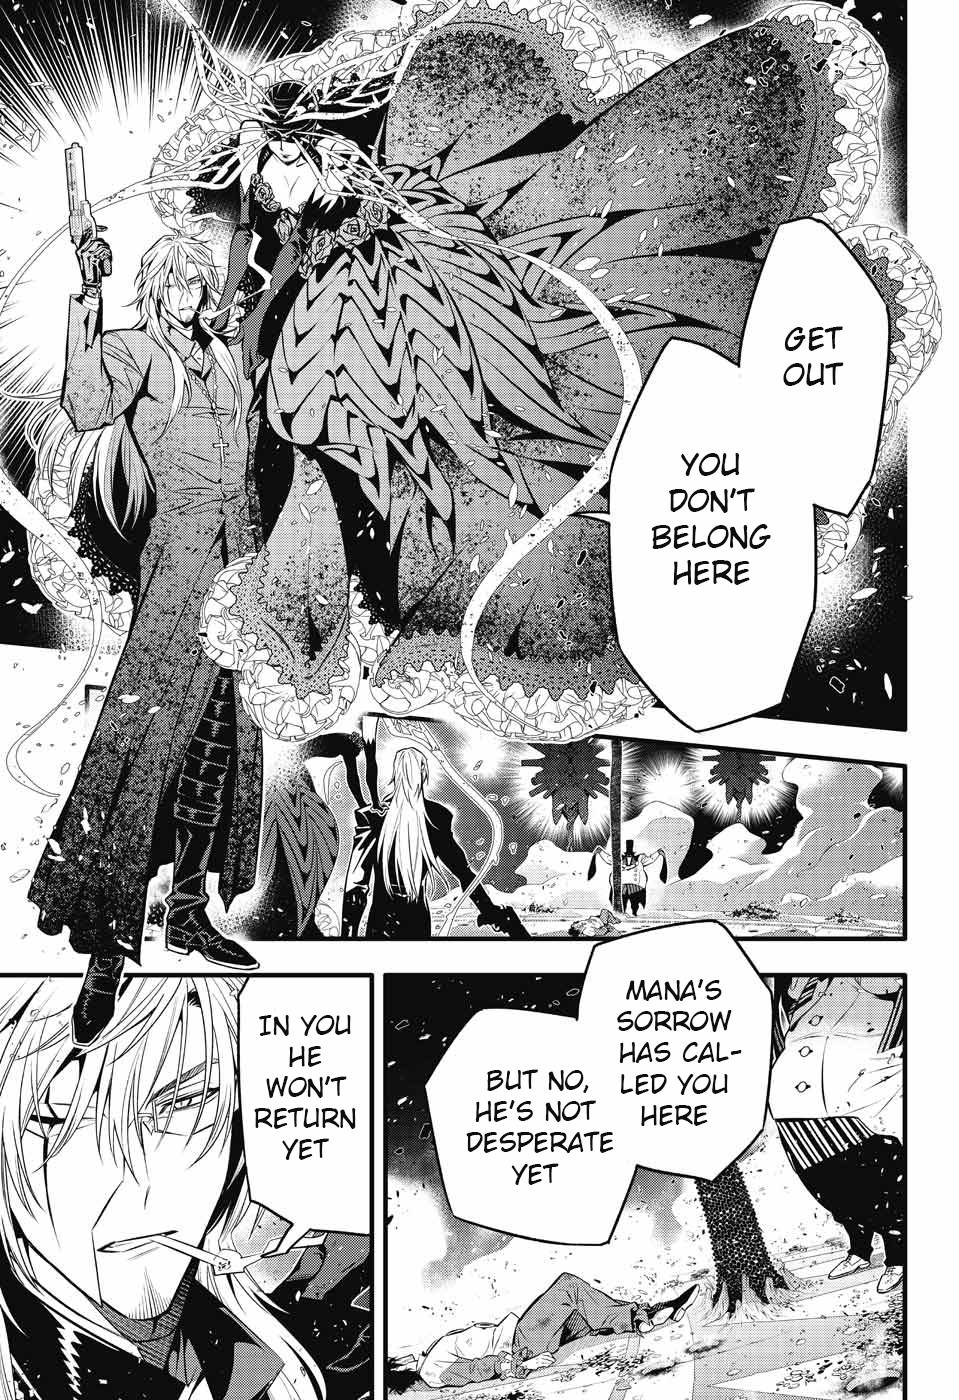 D.Gray-man chapter 244 page 5